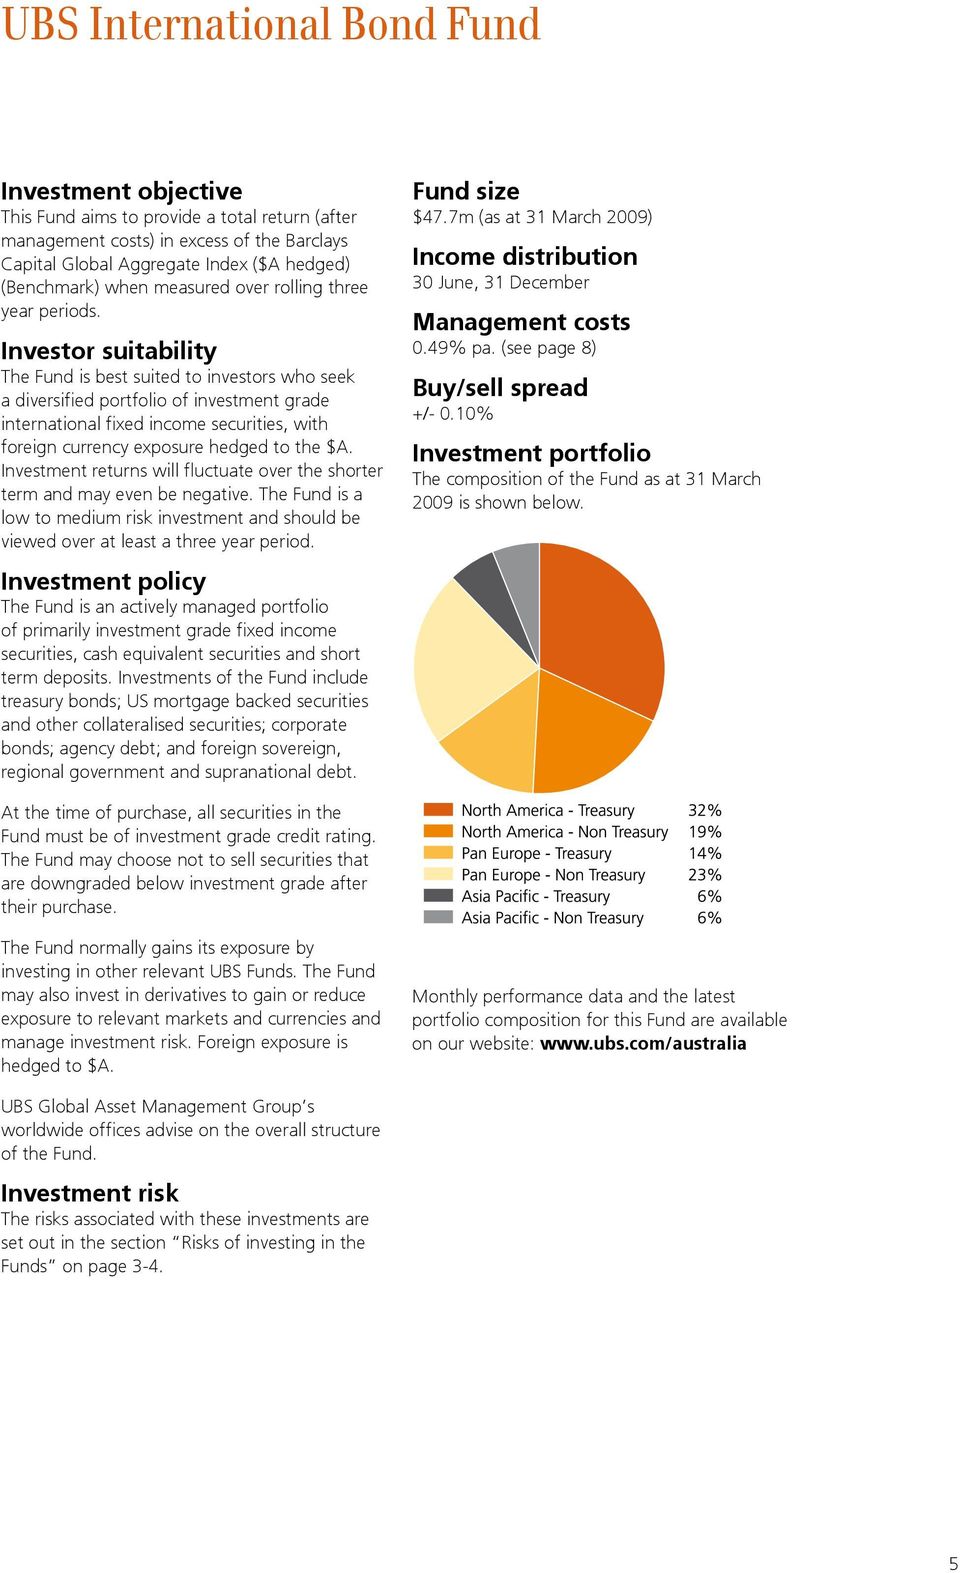 Investor suitability The Fund is best suited to investors who seek a diversified portfolio of investment grade international fixed income securities, with foreign currency exposure hedged to the $A.